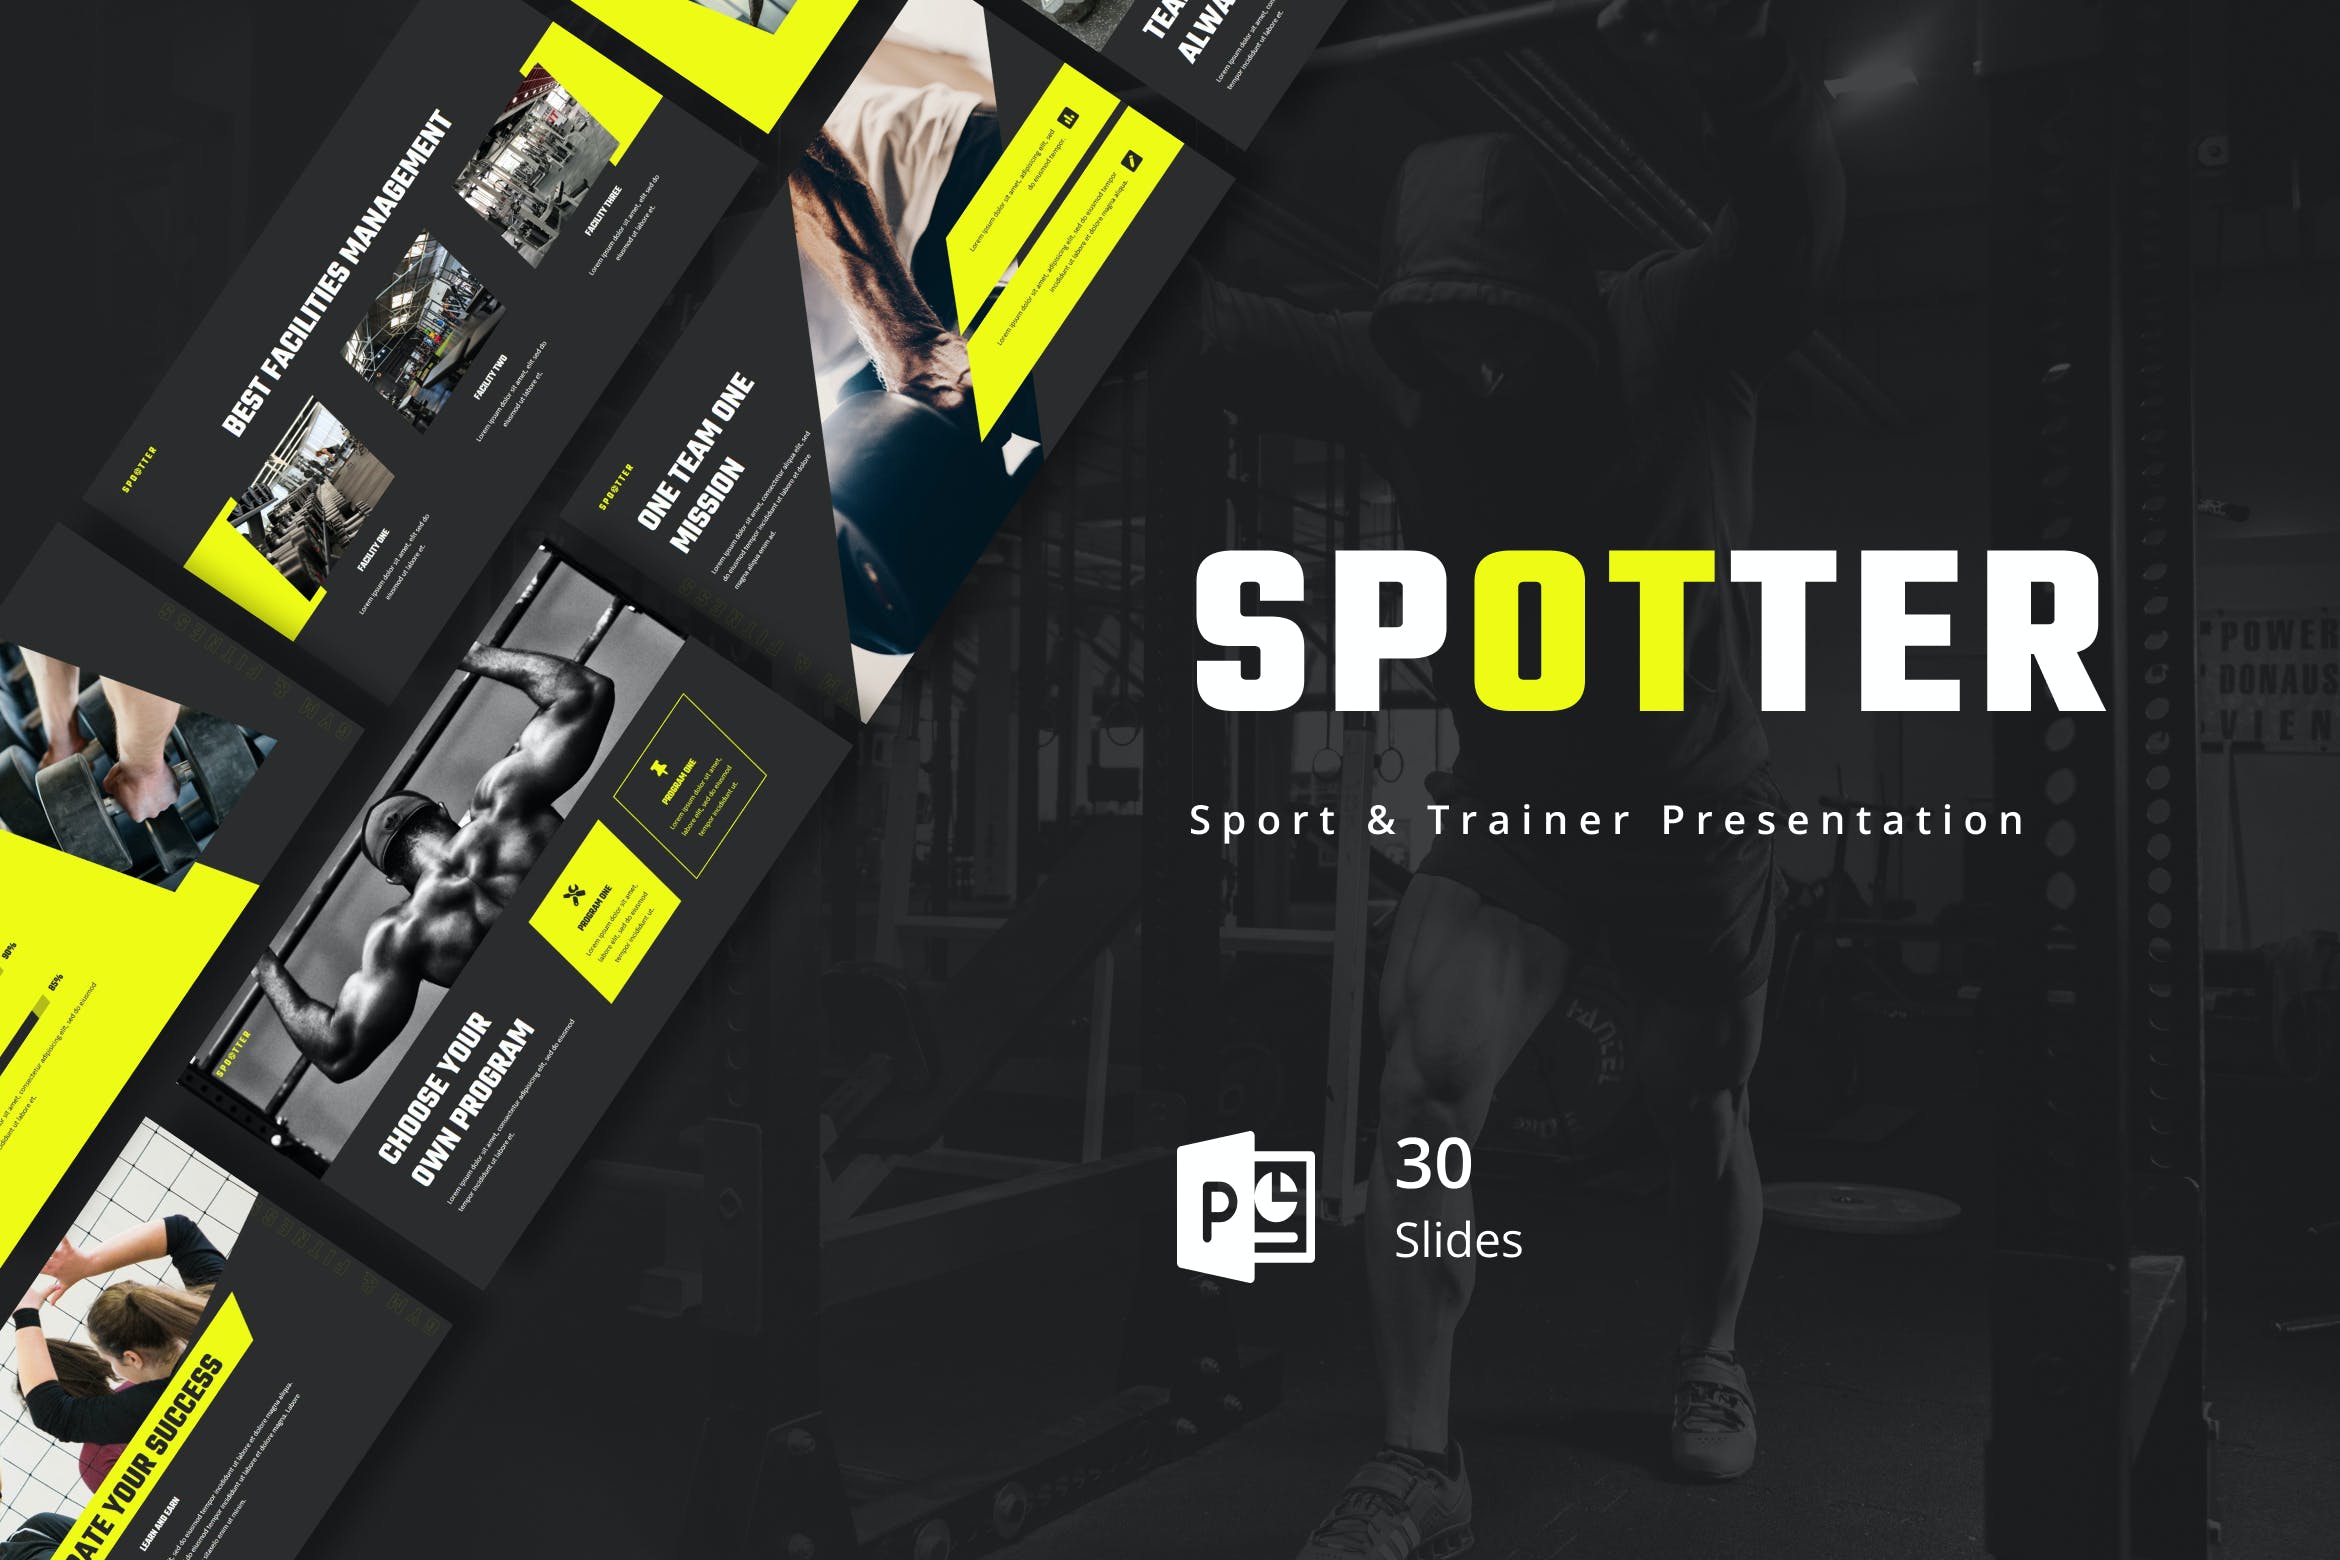 Cover image of Spotter - Sport & Trainer Presentation PowerPoint.